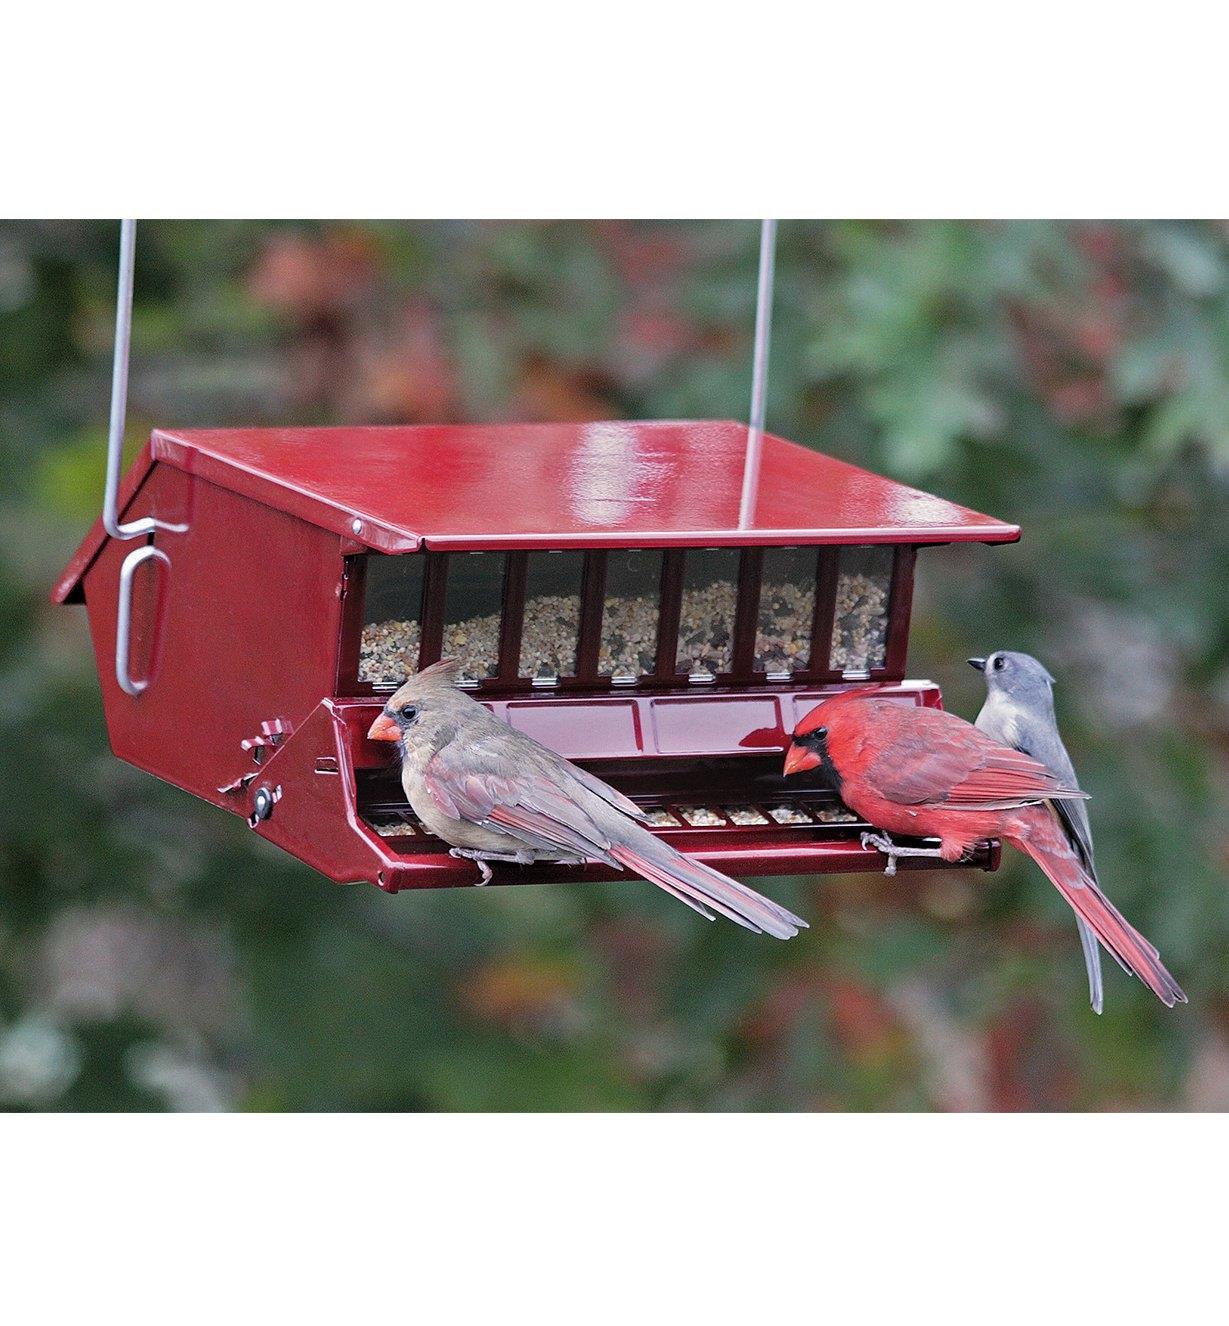 A pair of cardinals perch at the Single-Sided feeder